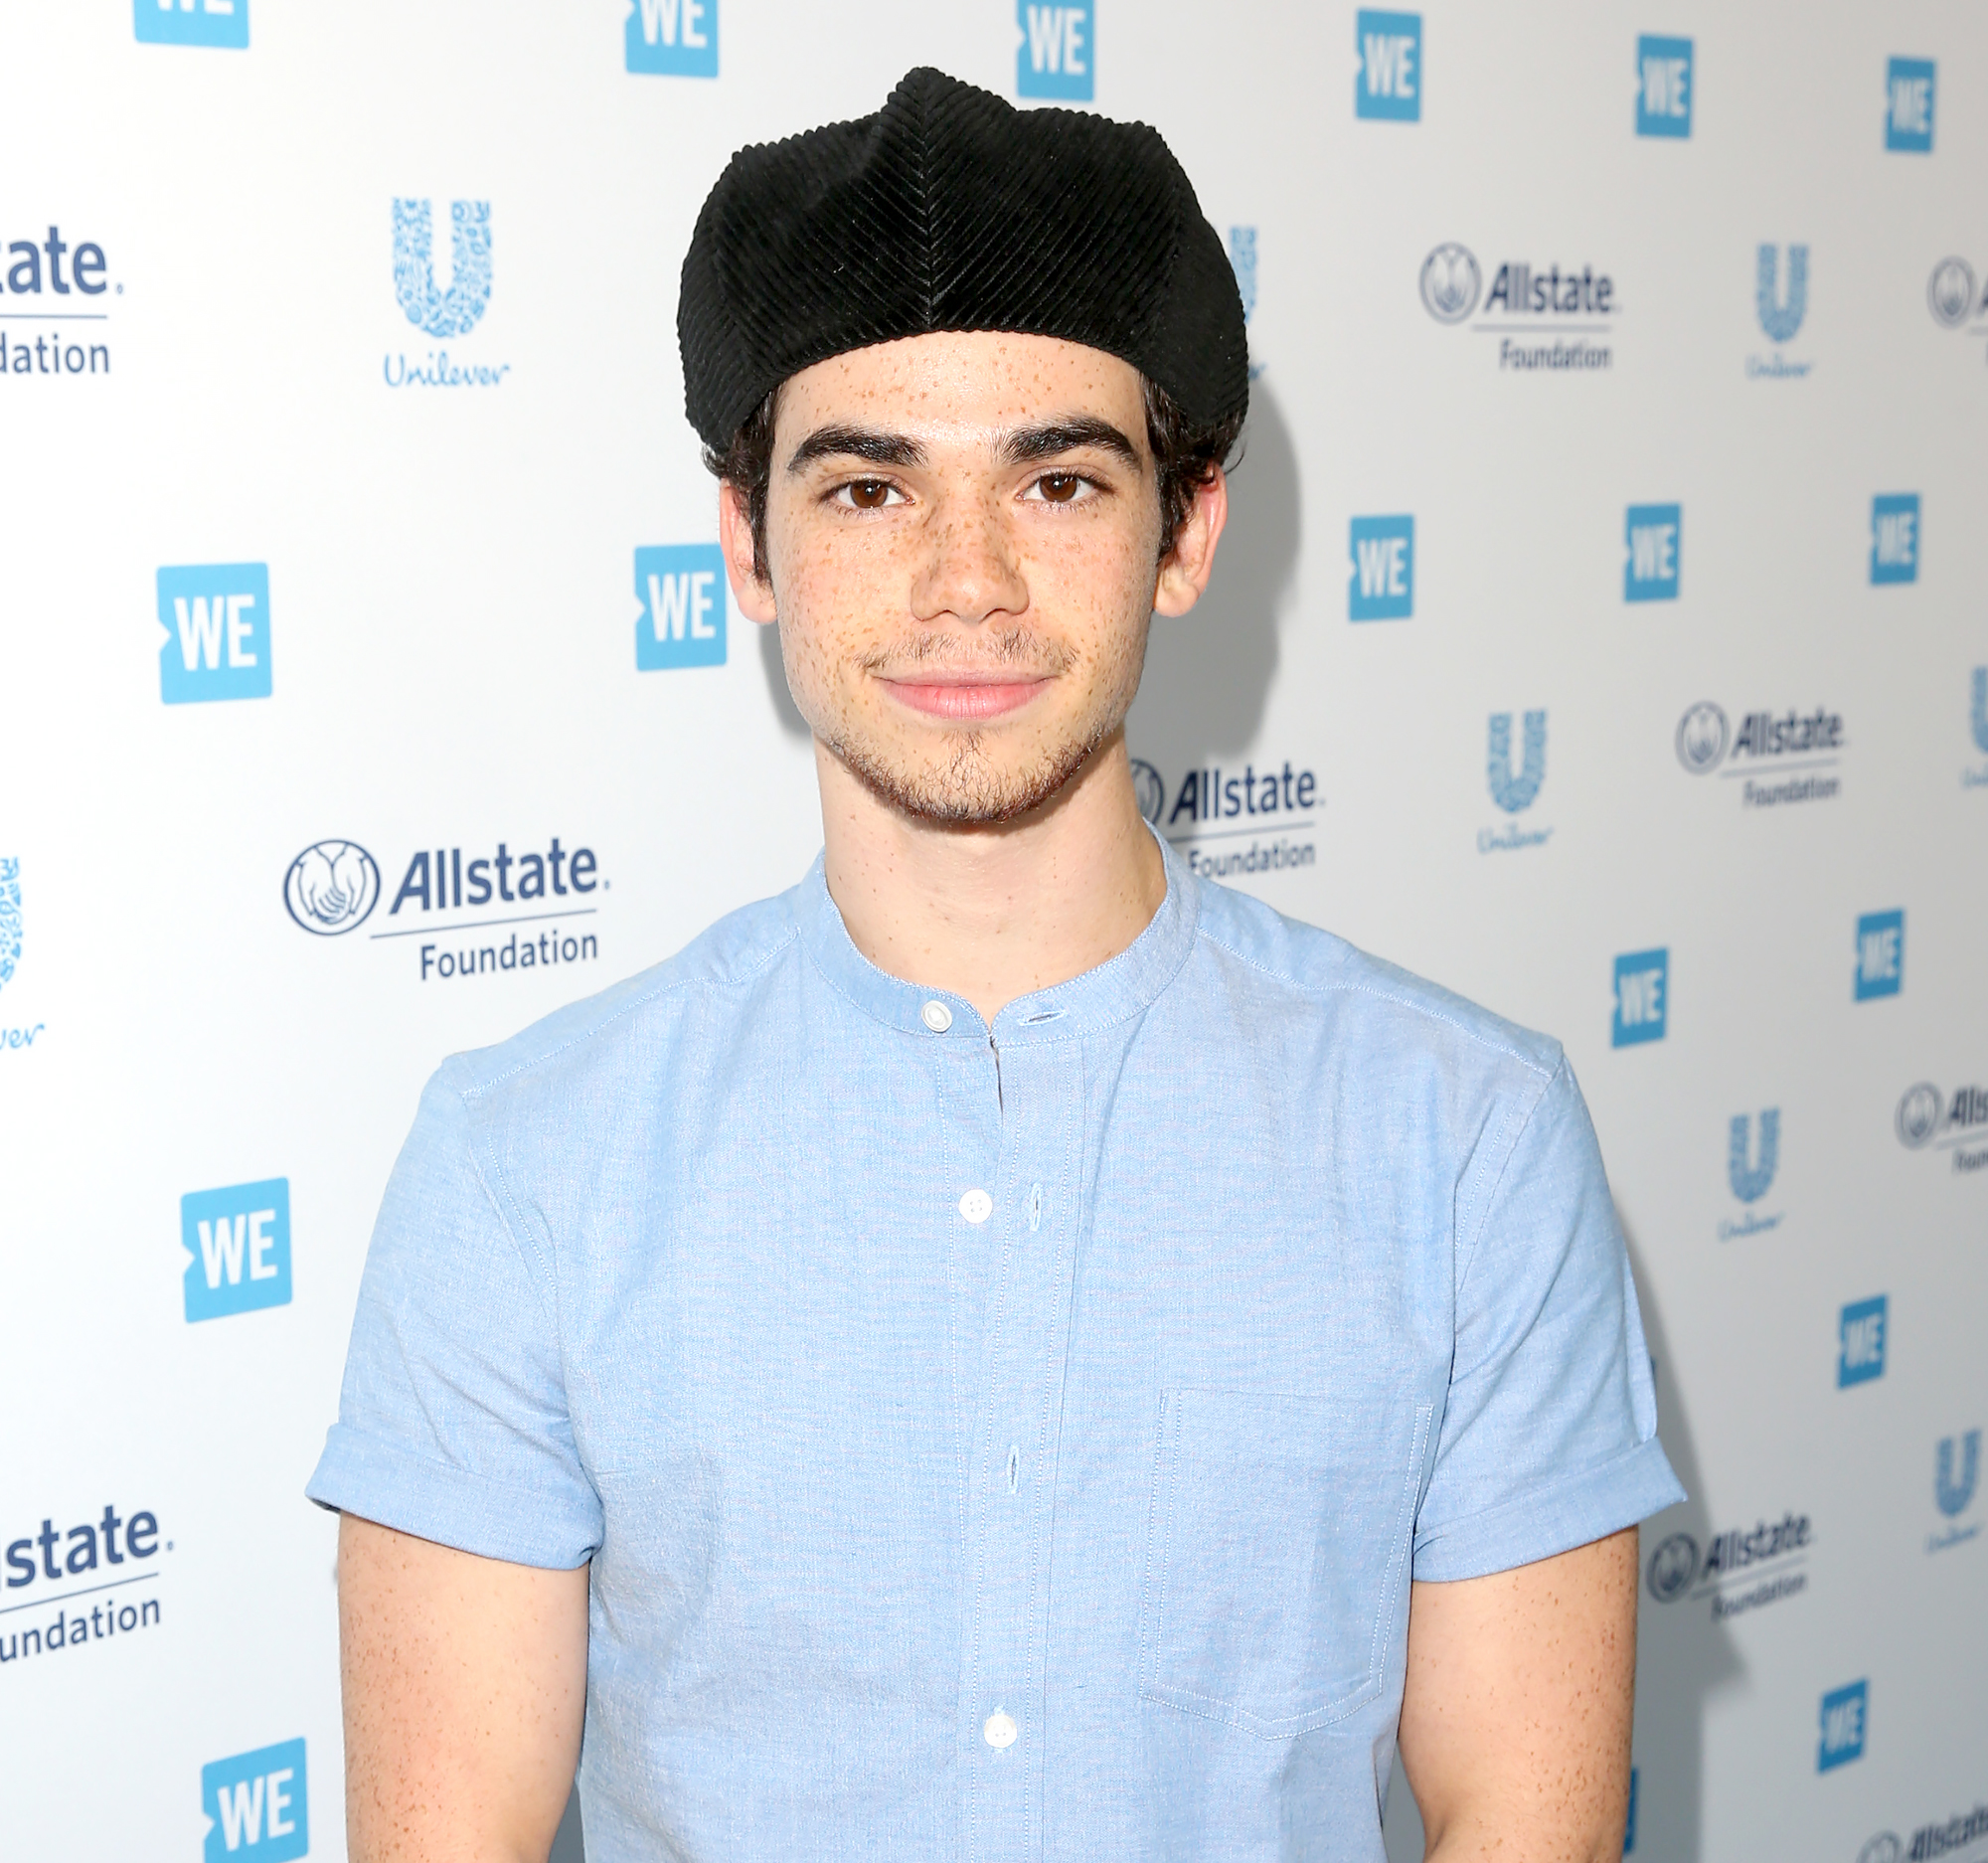 Cameron Boyce's Cause of Death Is Under 'Further Investigation'